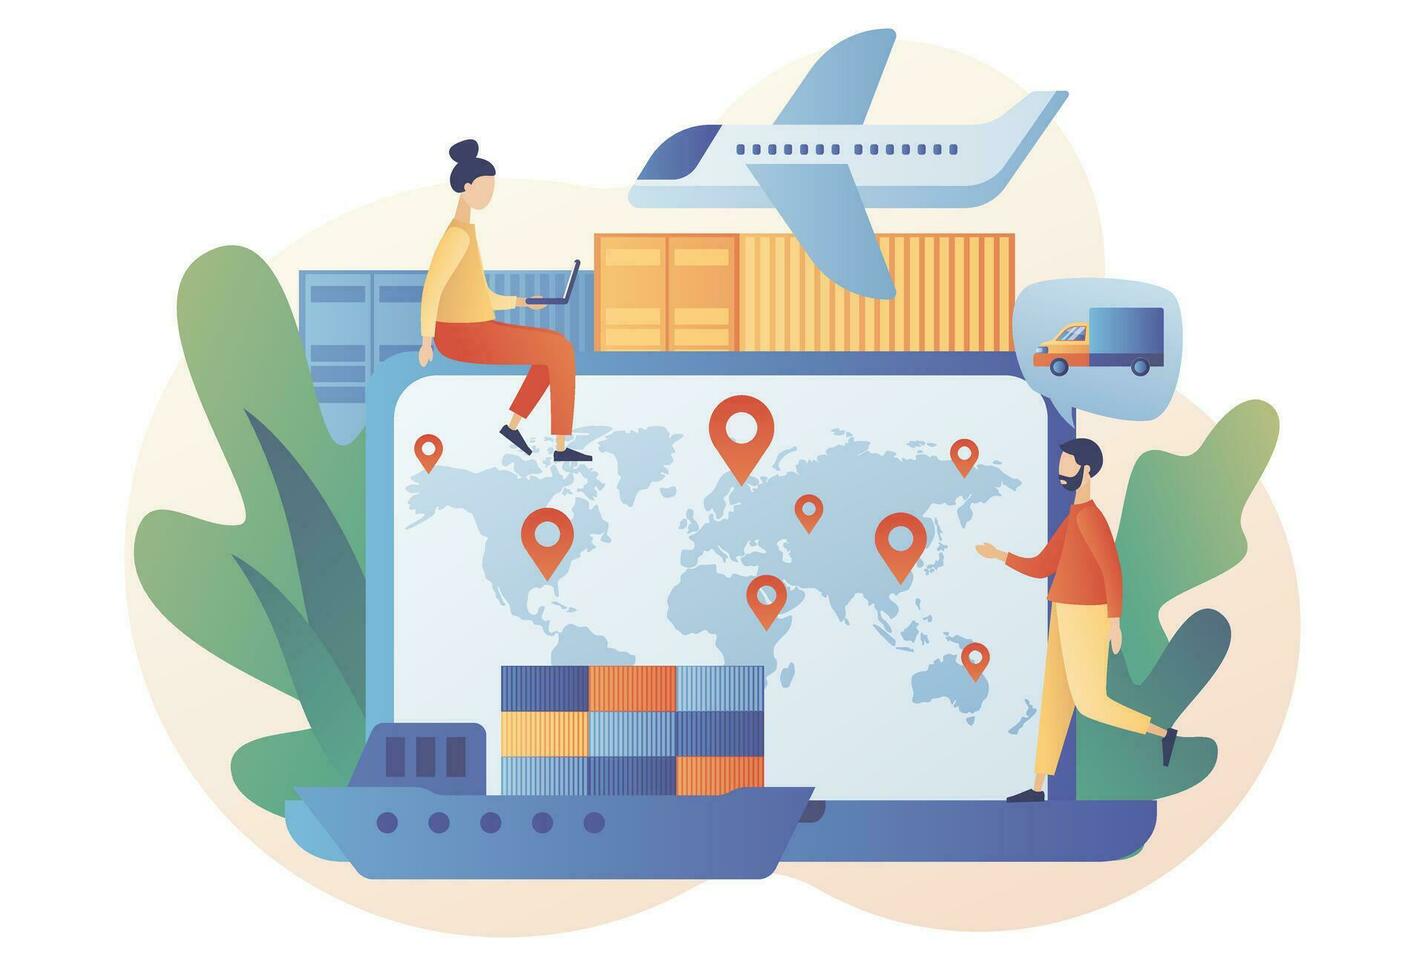 Business logistics. Global logistics network. Export, import, warehouse business, transportation. Tiny people tracks orders online. On-time delivery. Modern flat cartoon style. Vector illustration